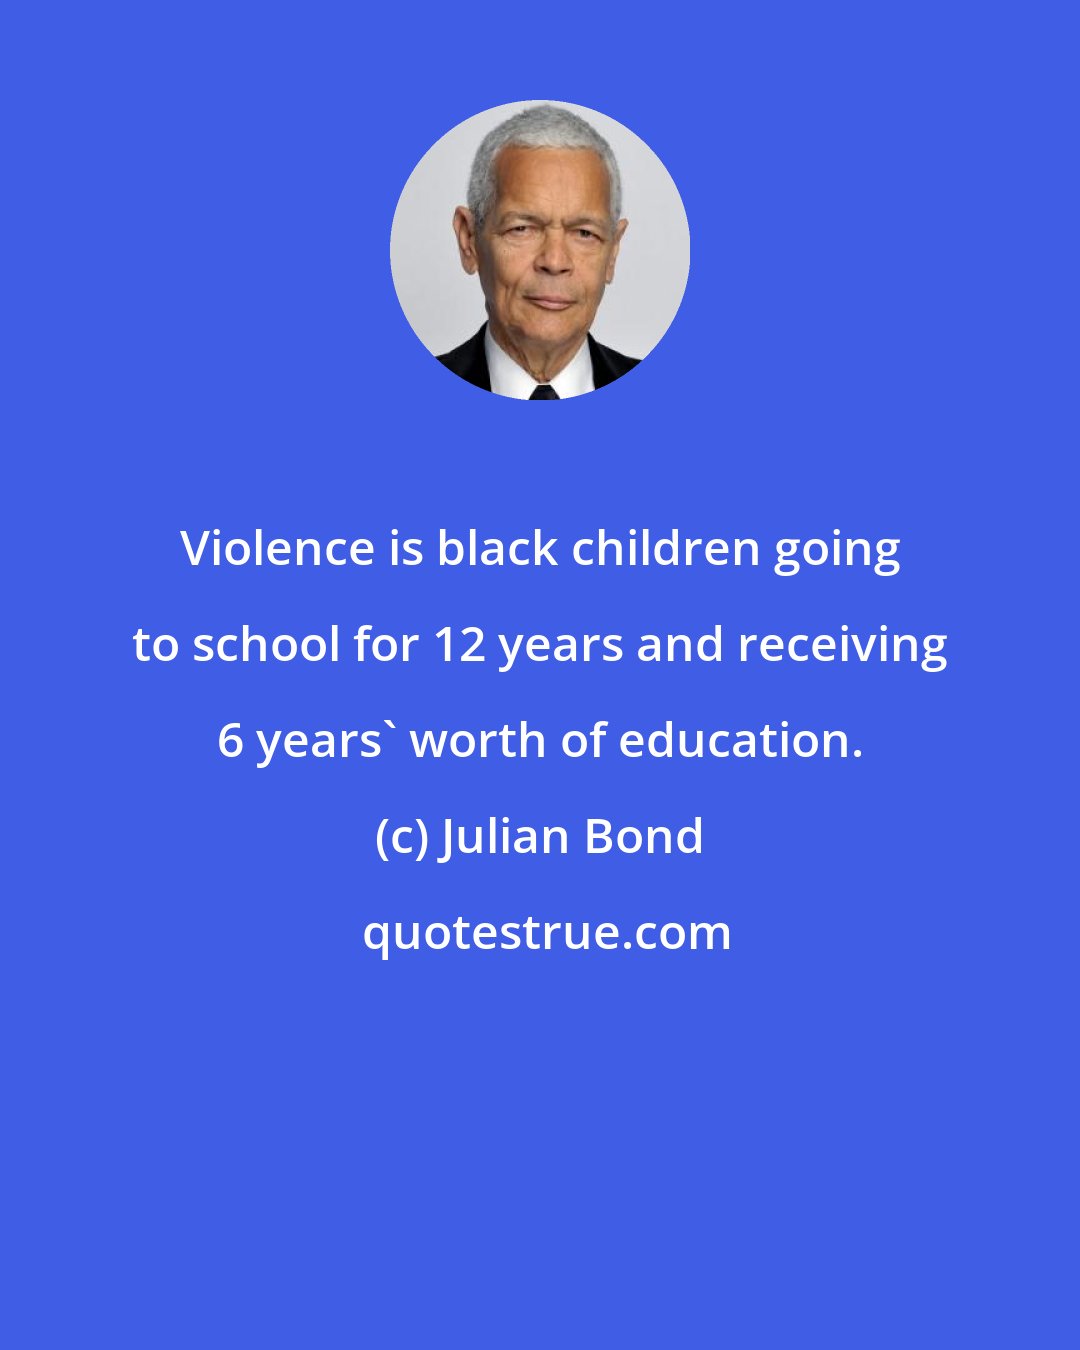 Julian Bond: Violence is black children going to school for 12 years and receiving 6 years' worth of education.